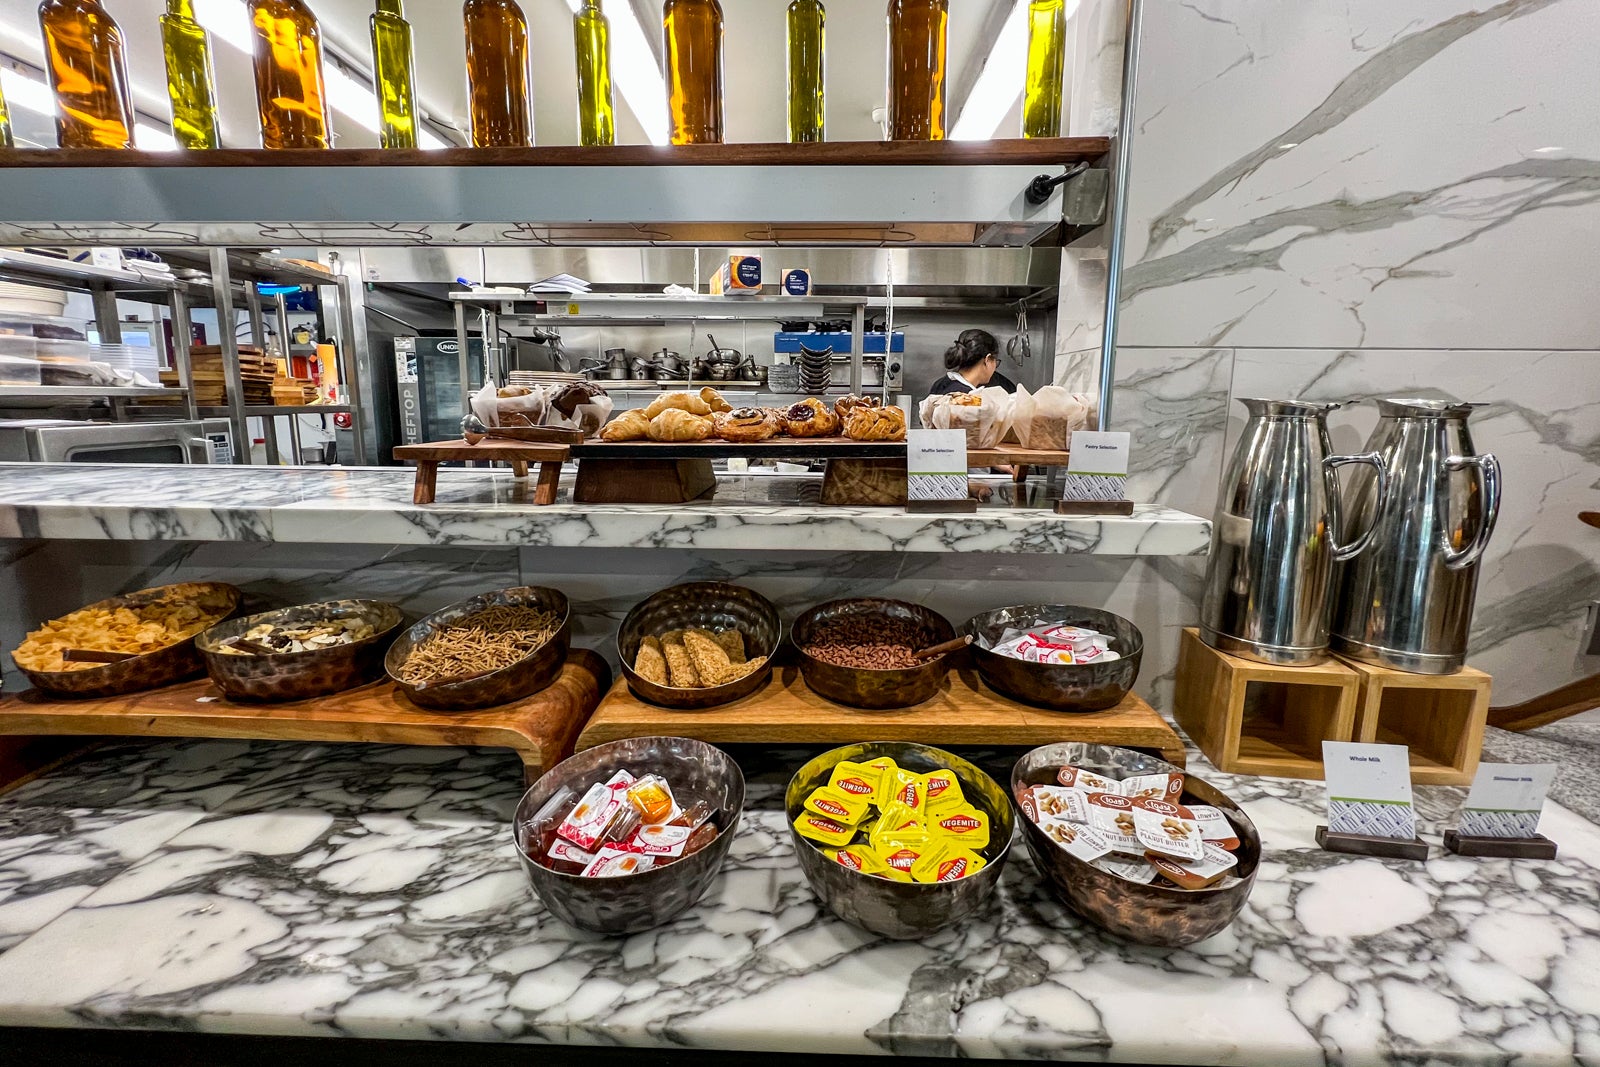 Hilton’s international free breakfast is here to stay — at least for now